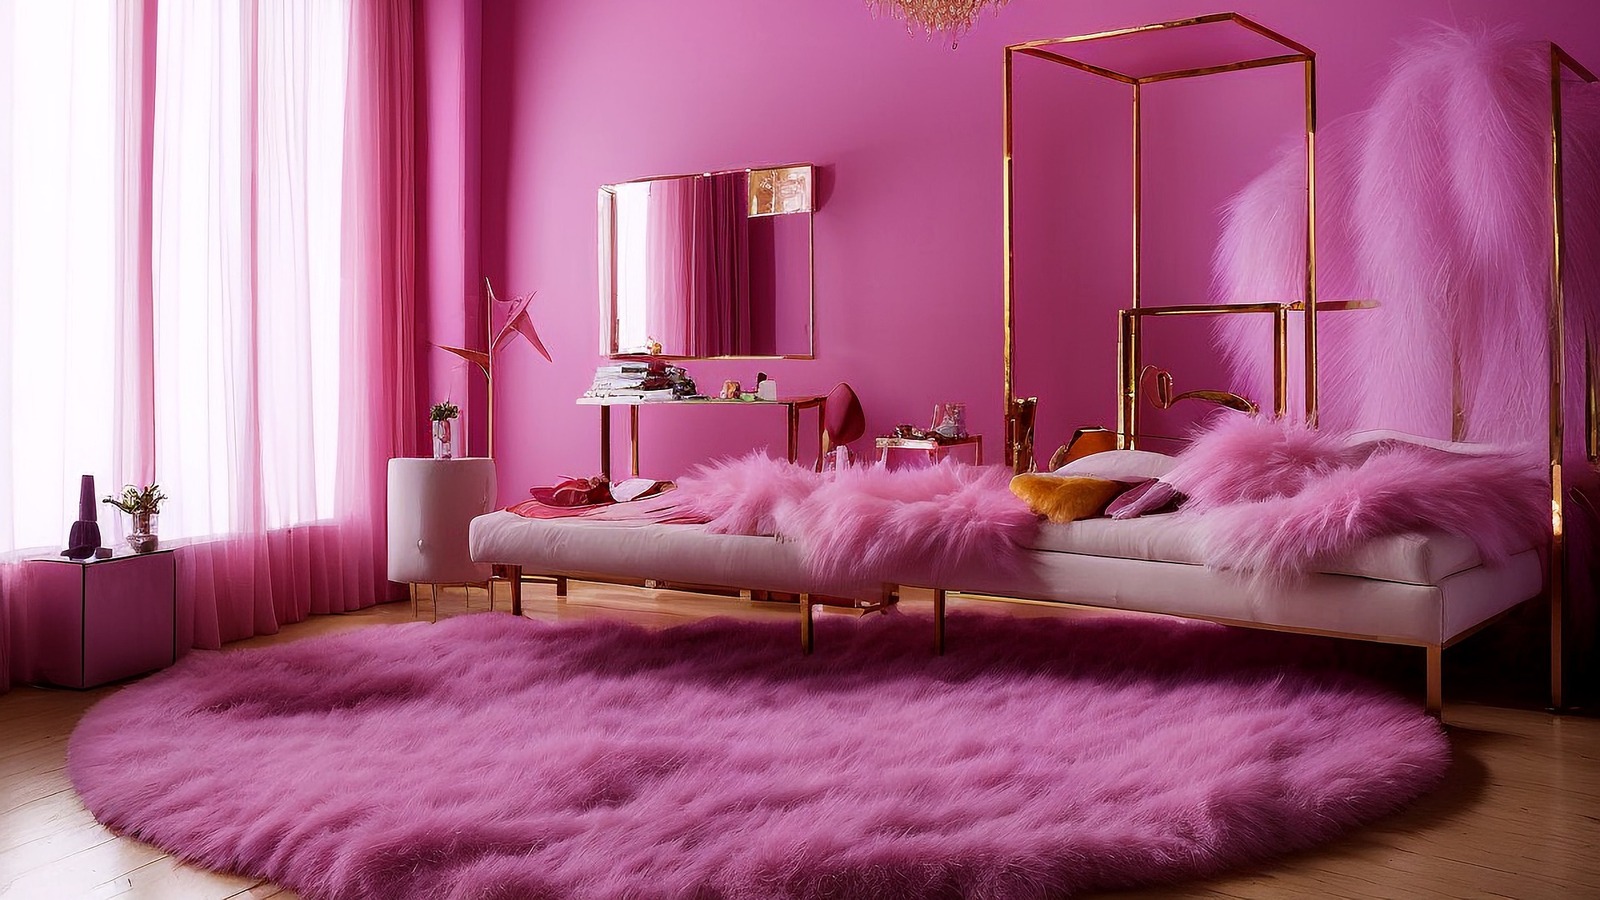 These Decor Trends Took Over TikTok Last Year—Here's What to Expect in 2023